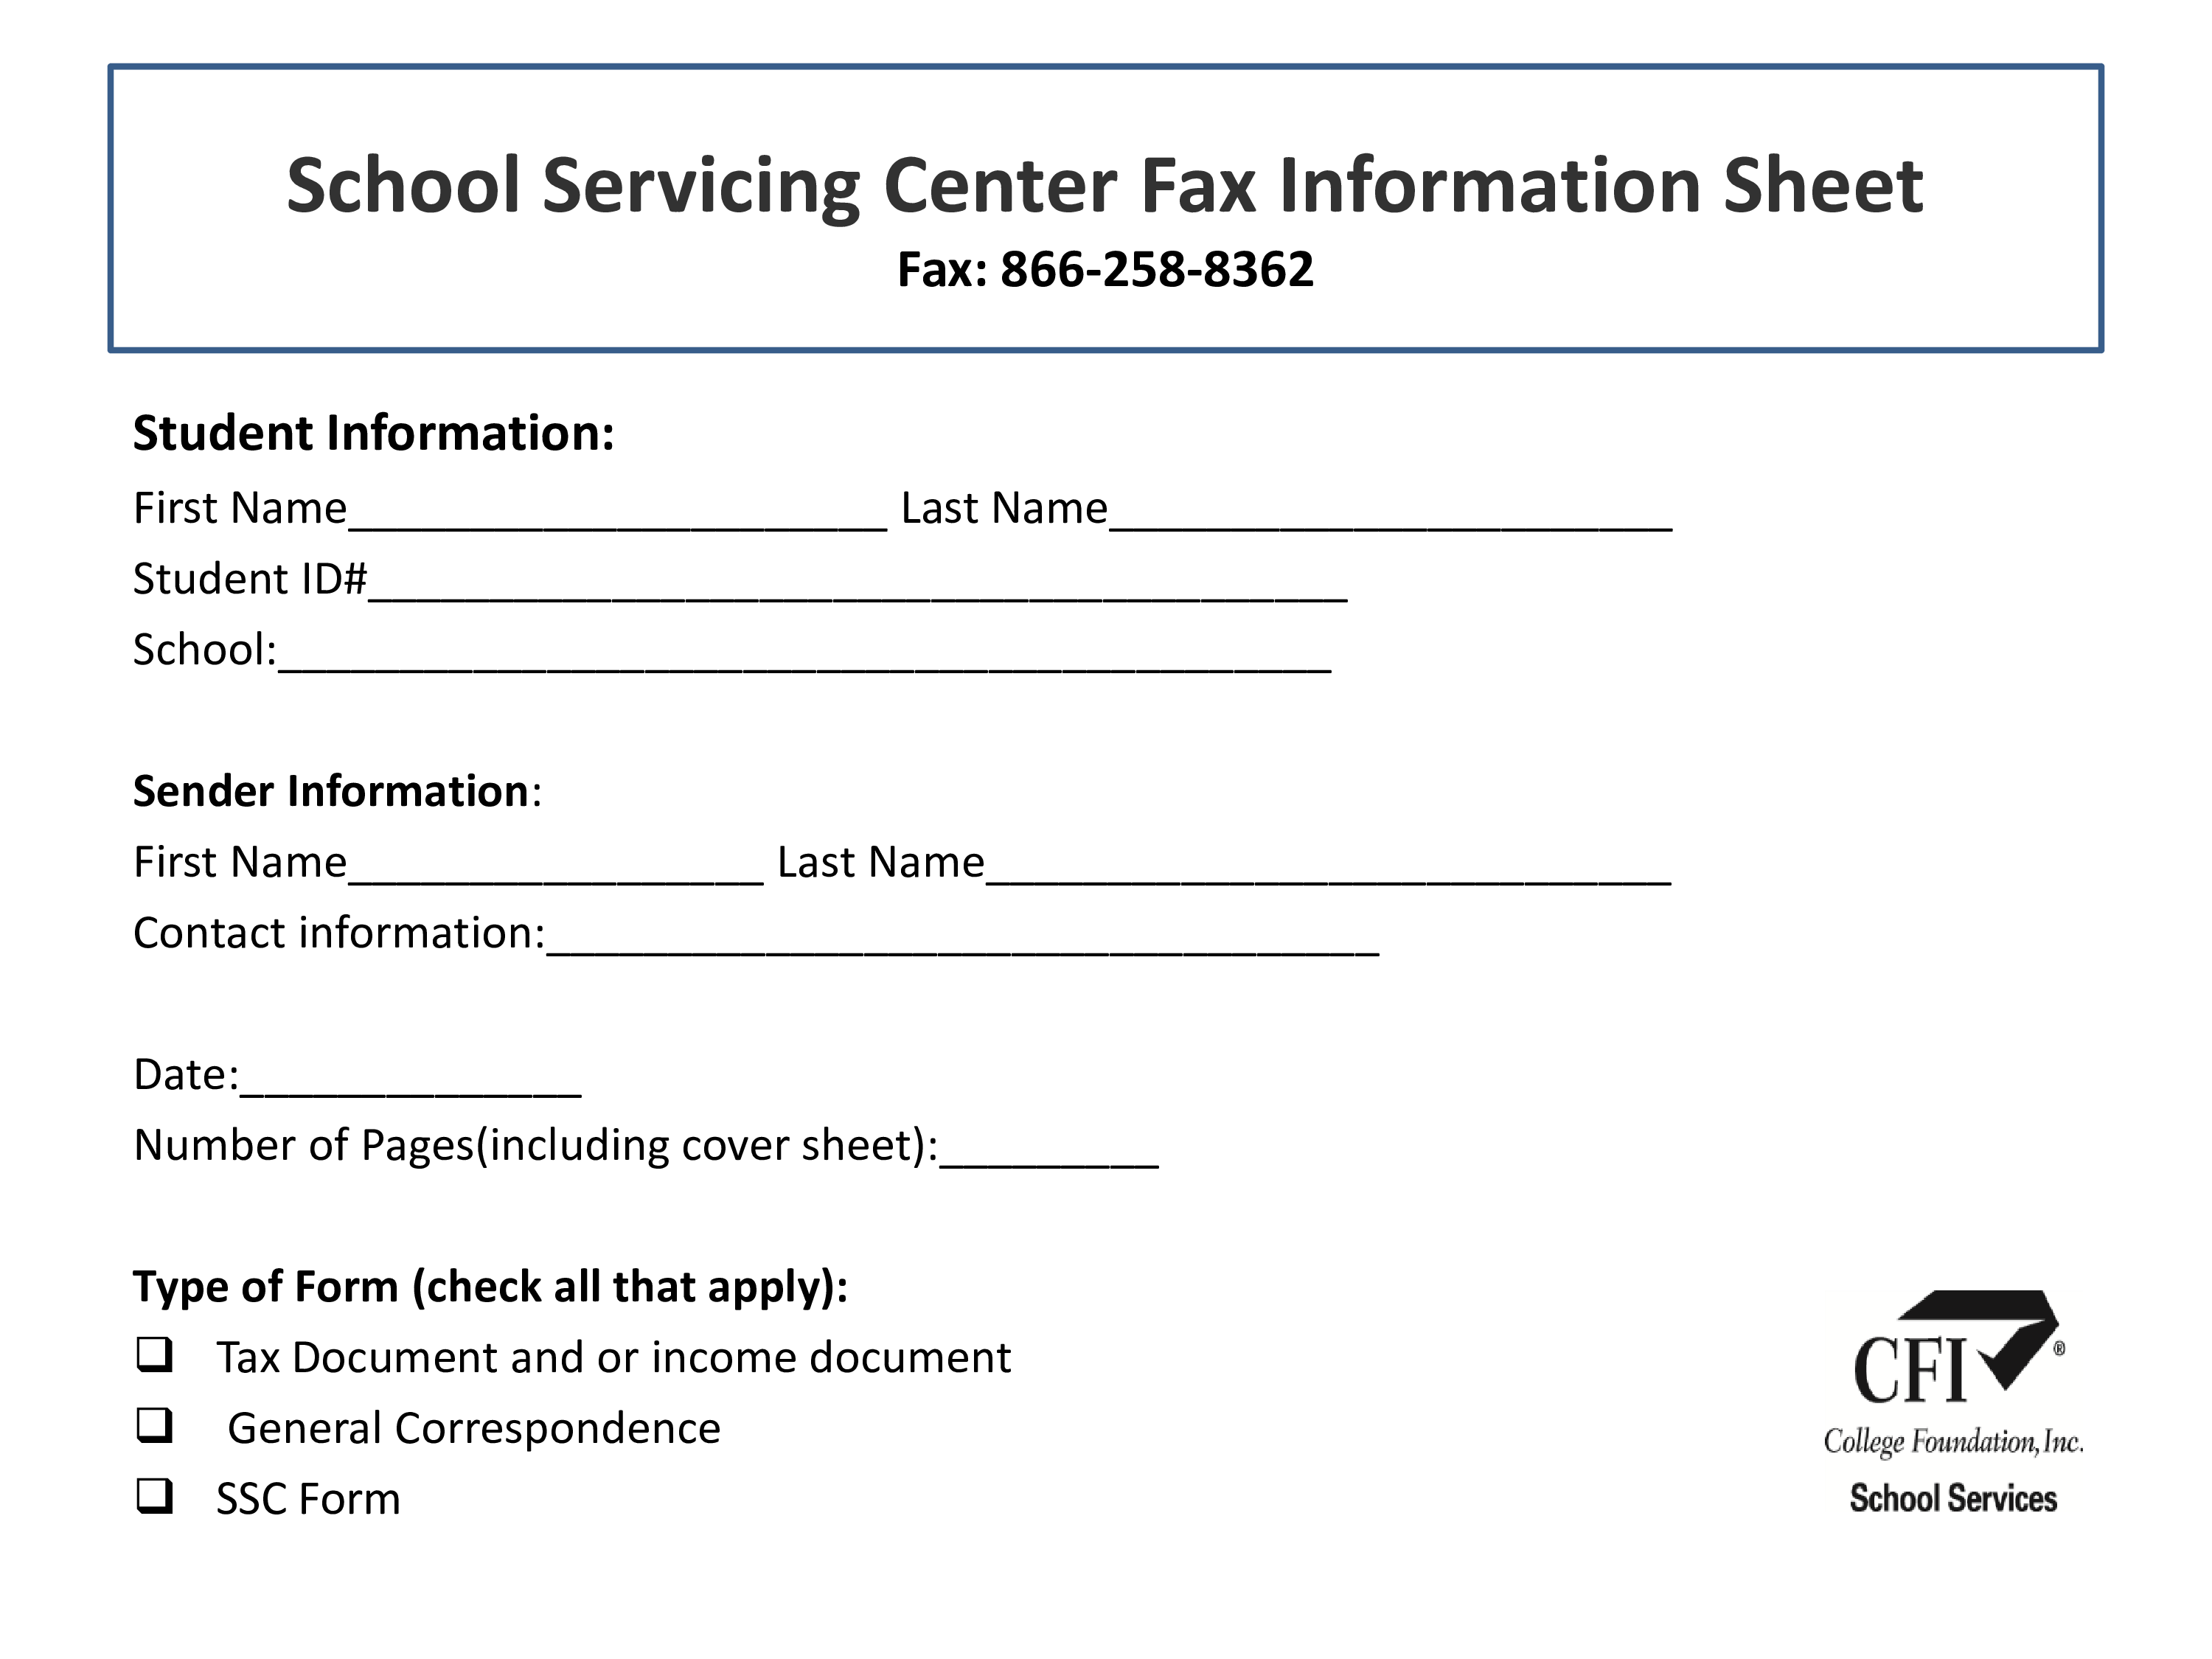 School Servicing Center Fax Cover Sheet main image